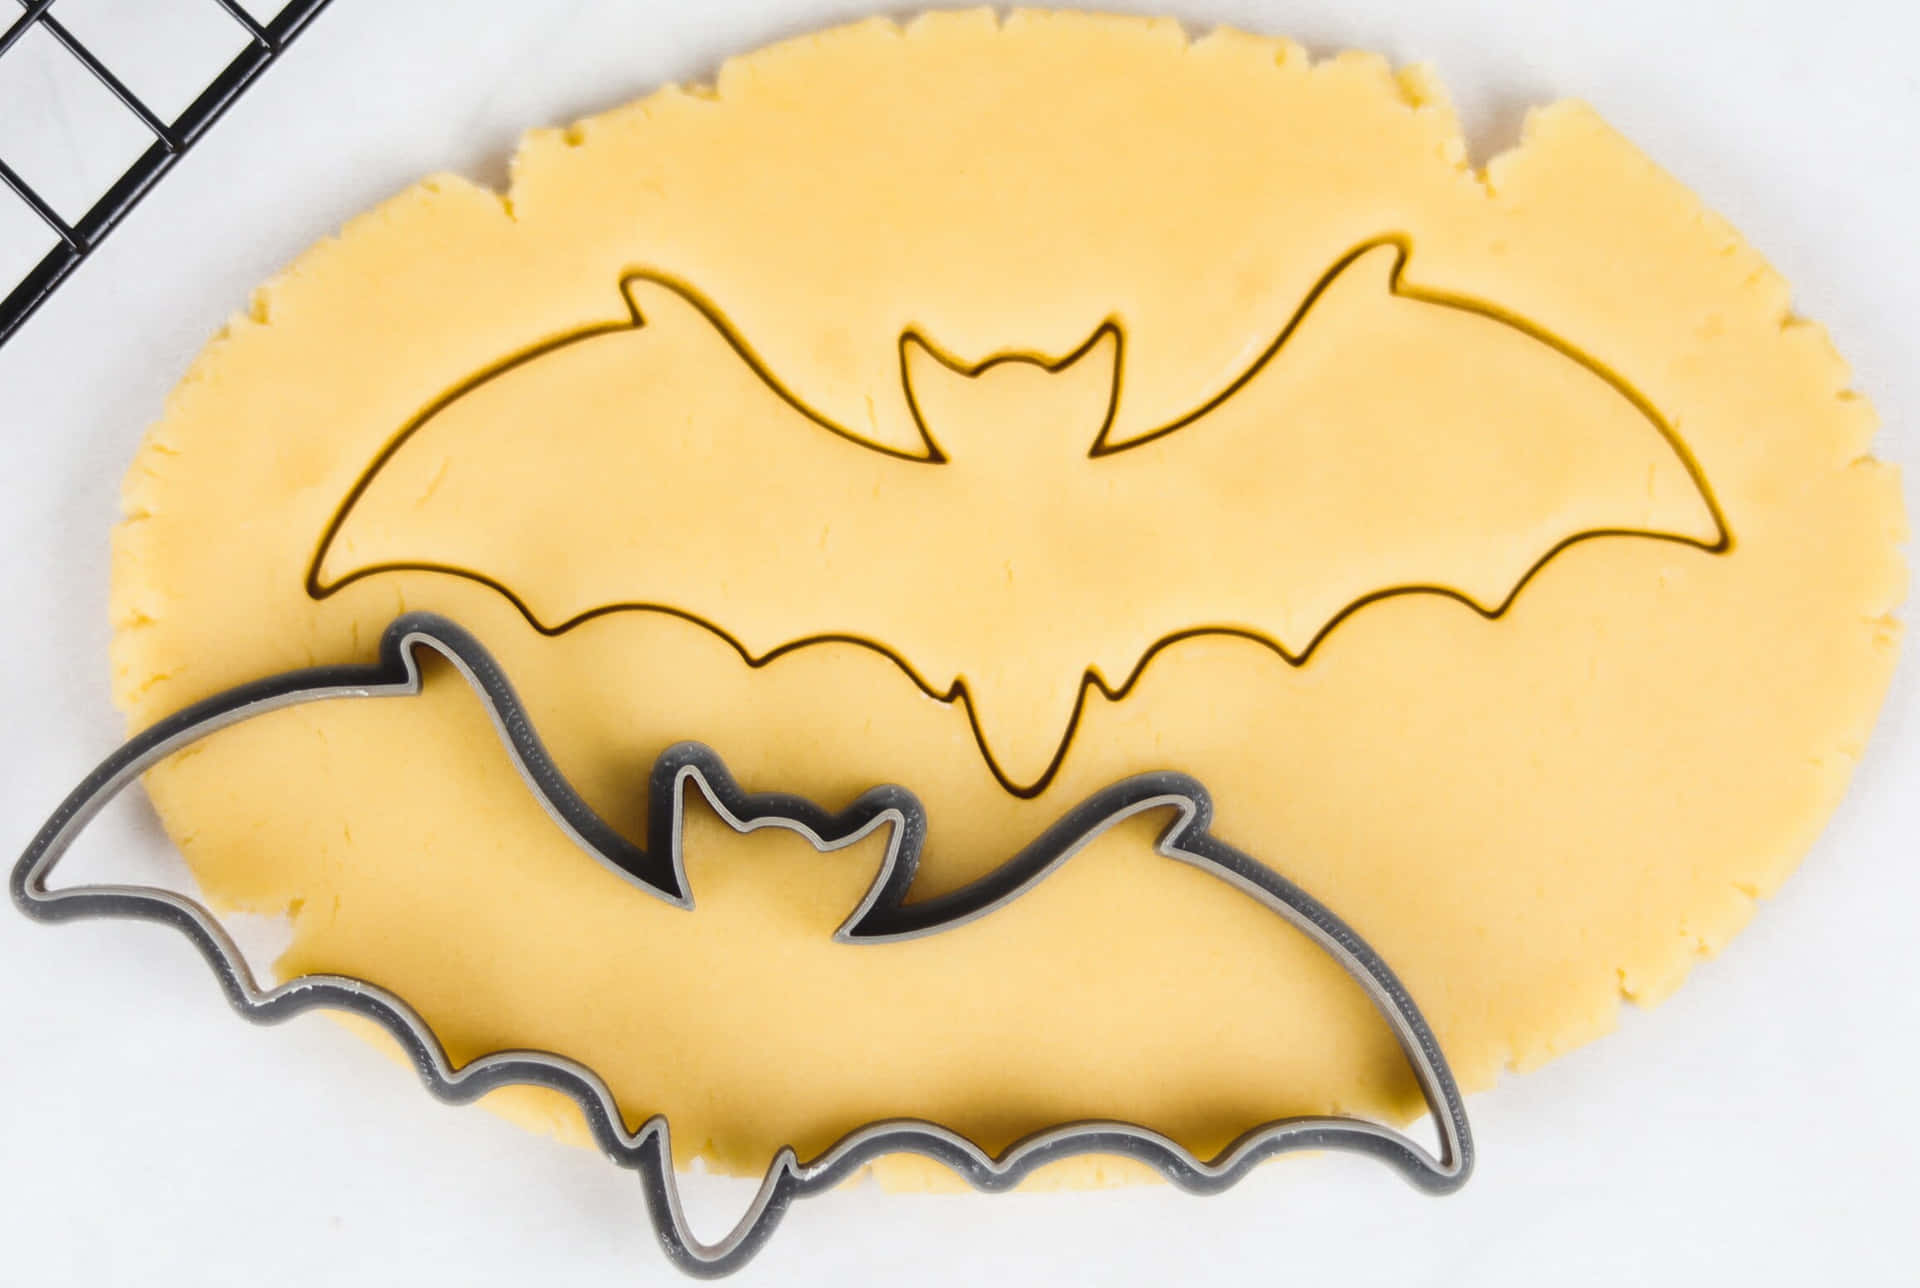 Get creative with your Halloween cookies using spooky cookie cutters! Wallpaper